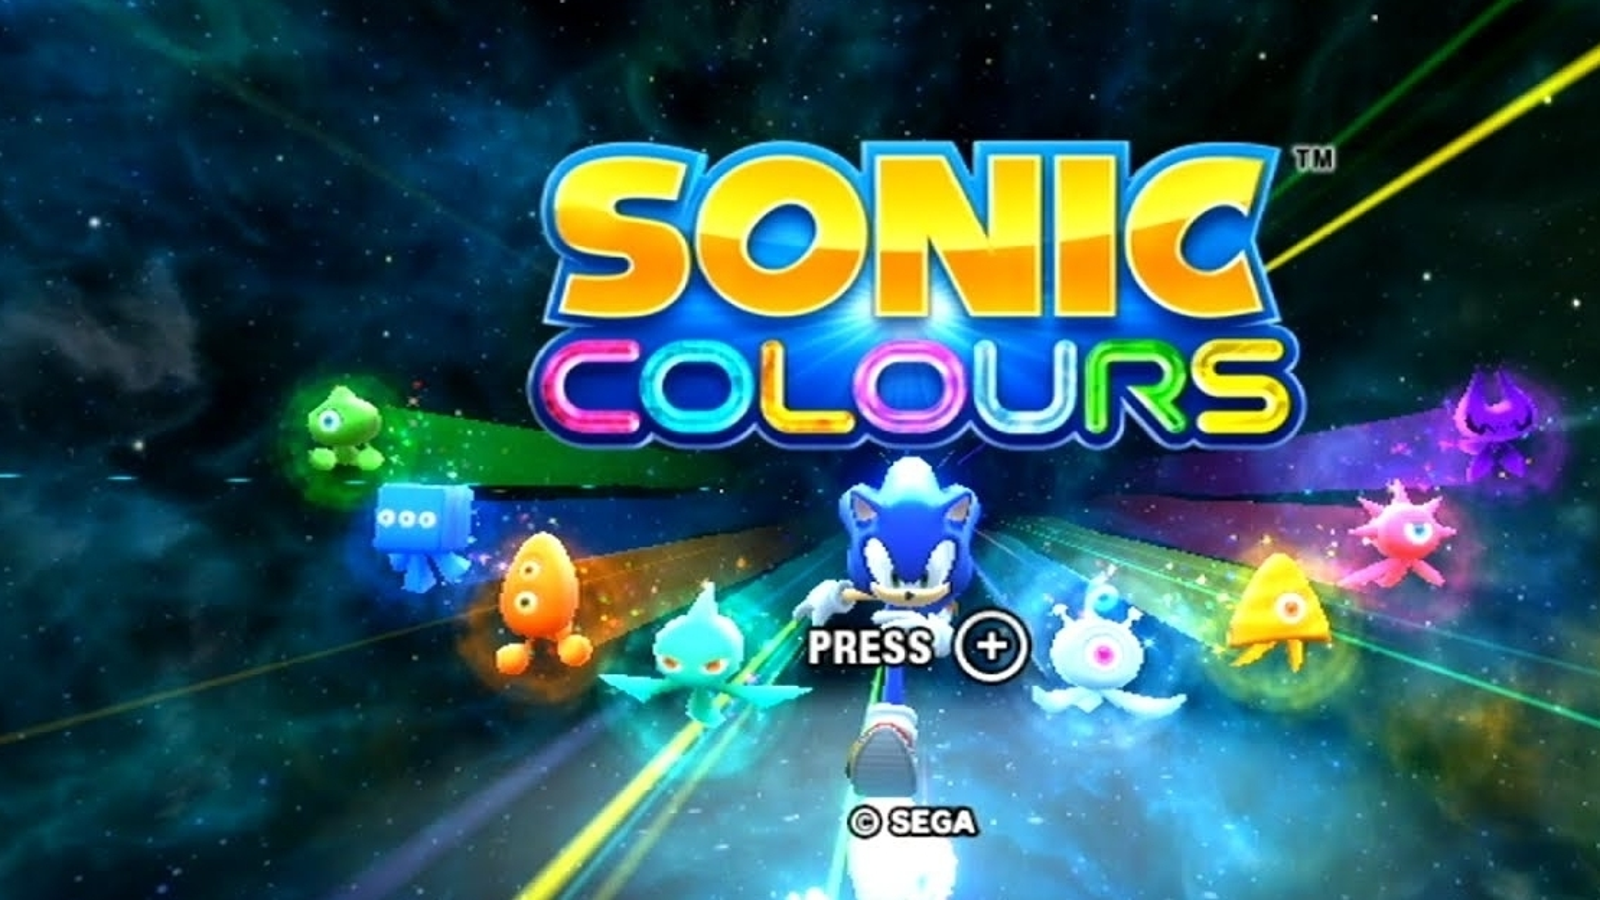 Nintendo DS Video Games Sonic Colors 2010 for sale